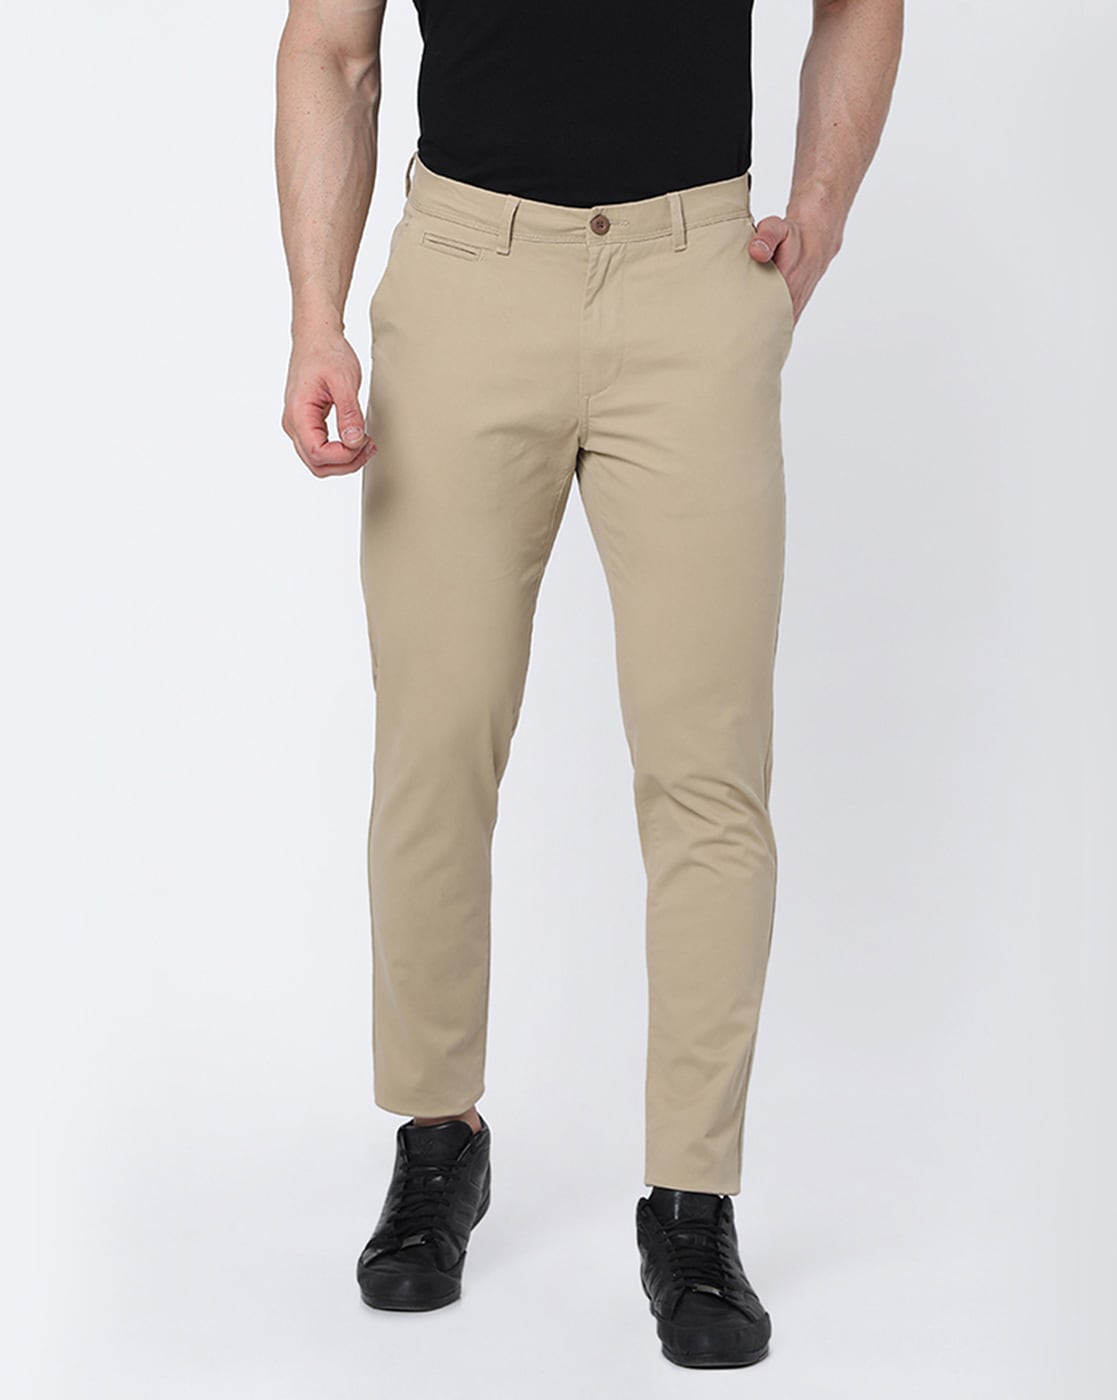 Chinos for Men | The Classic Chinos Pants Graphite